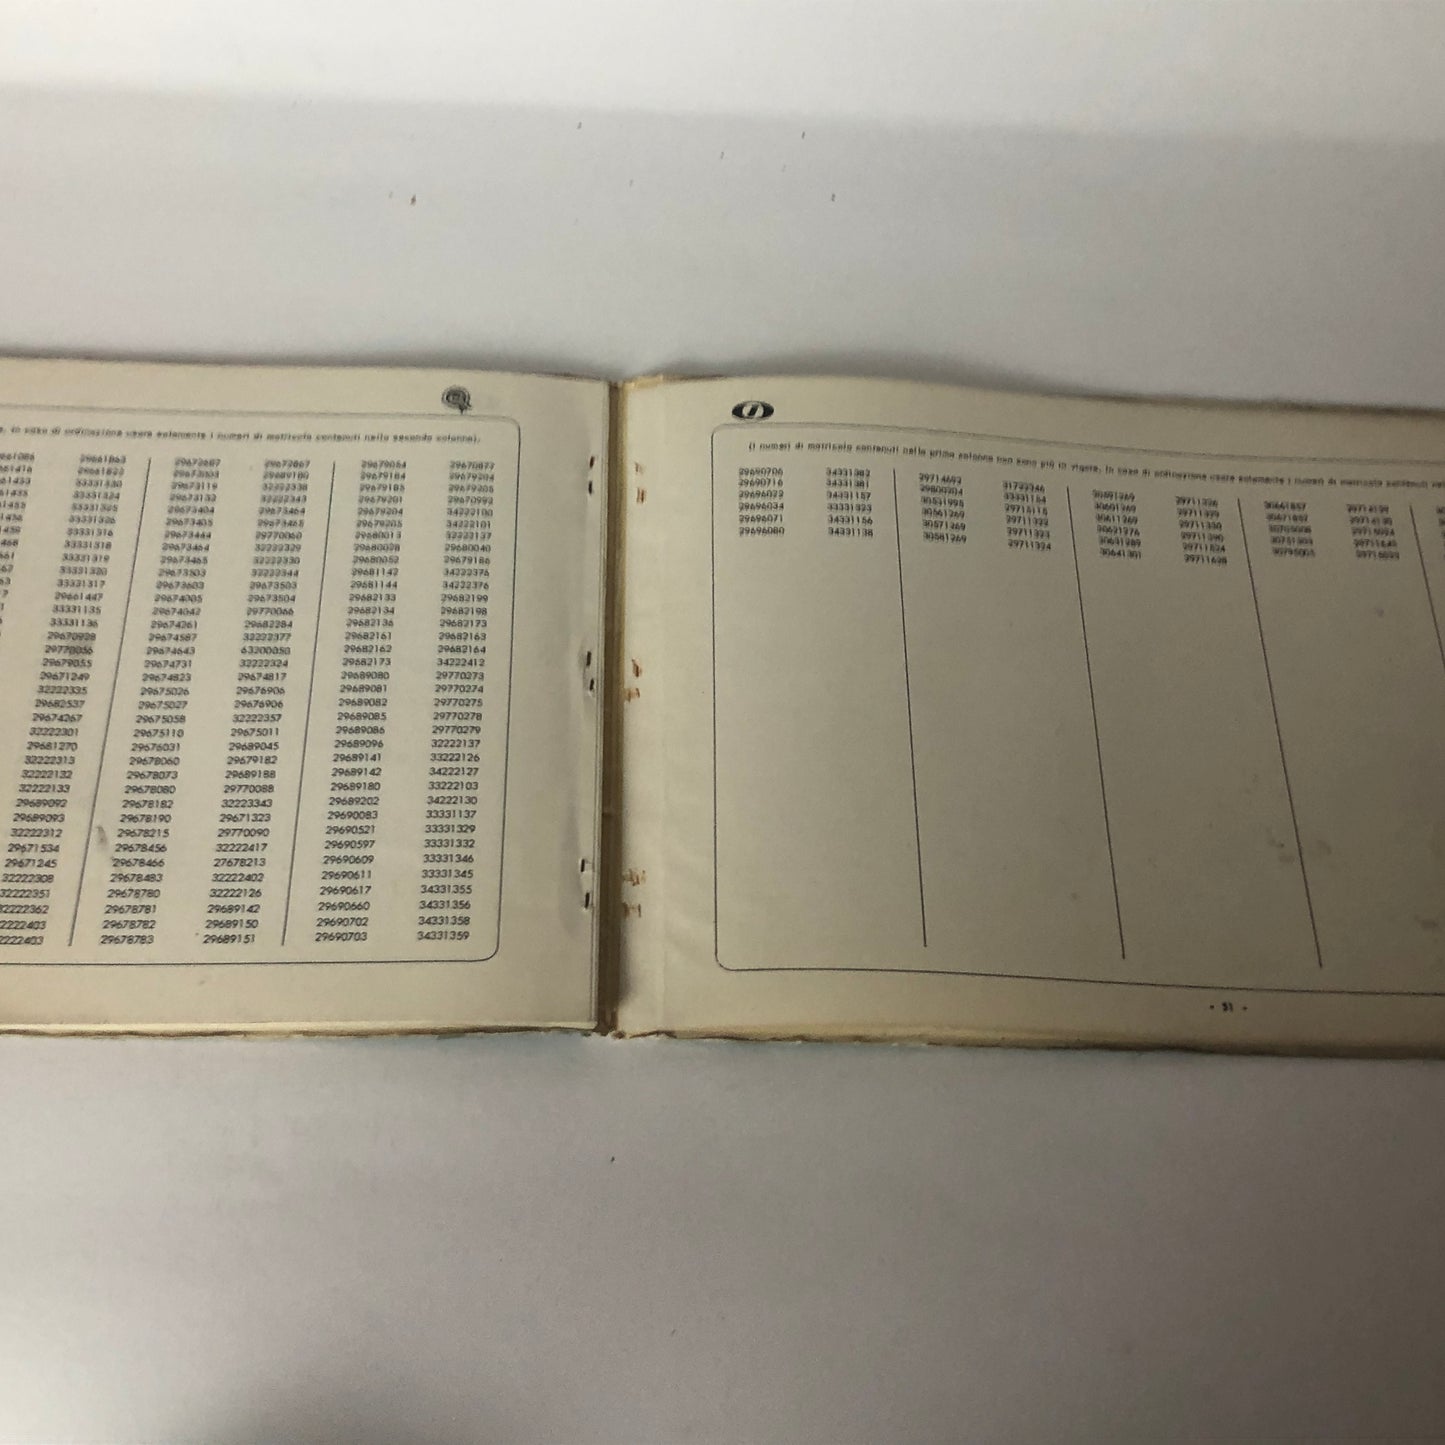 Innocenti, Price List No. 4 Spare Parts for SIDA Imported Cars Year 1966